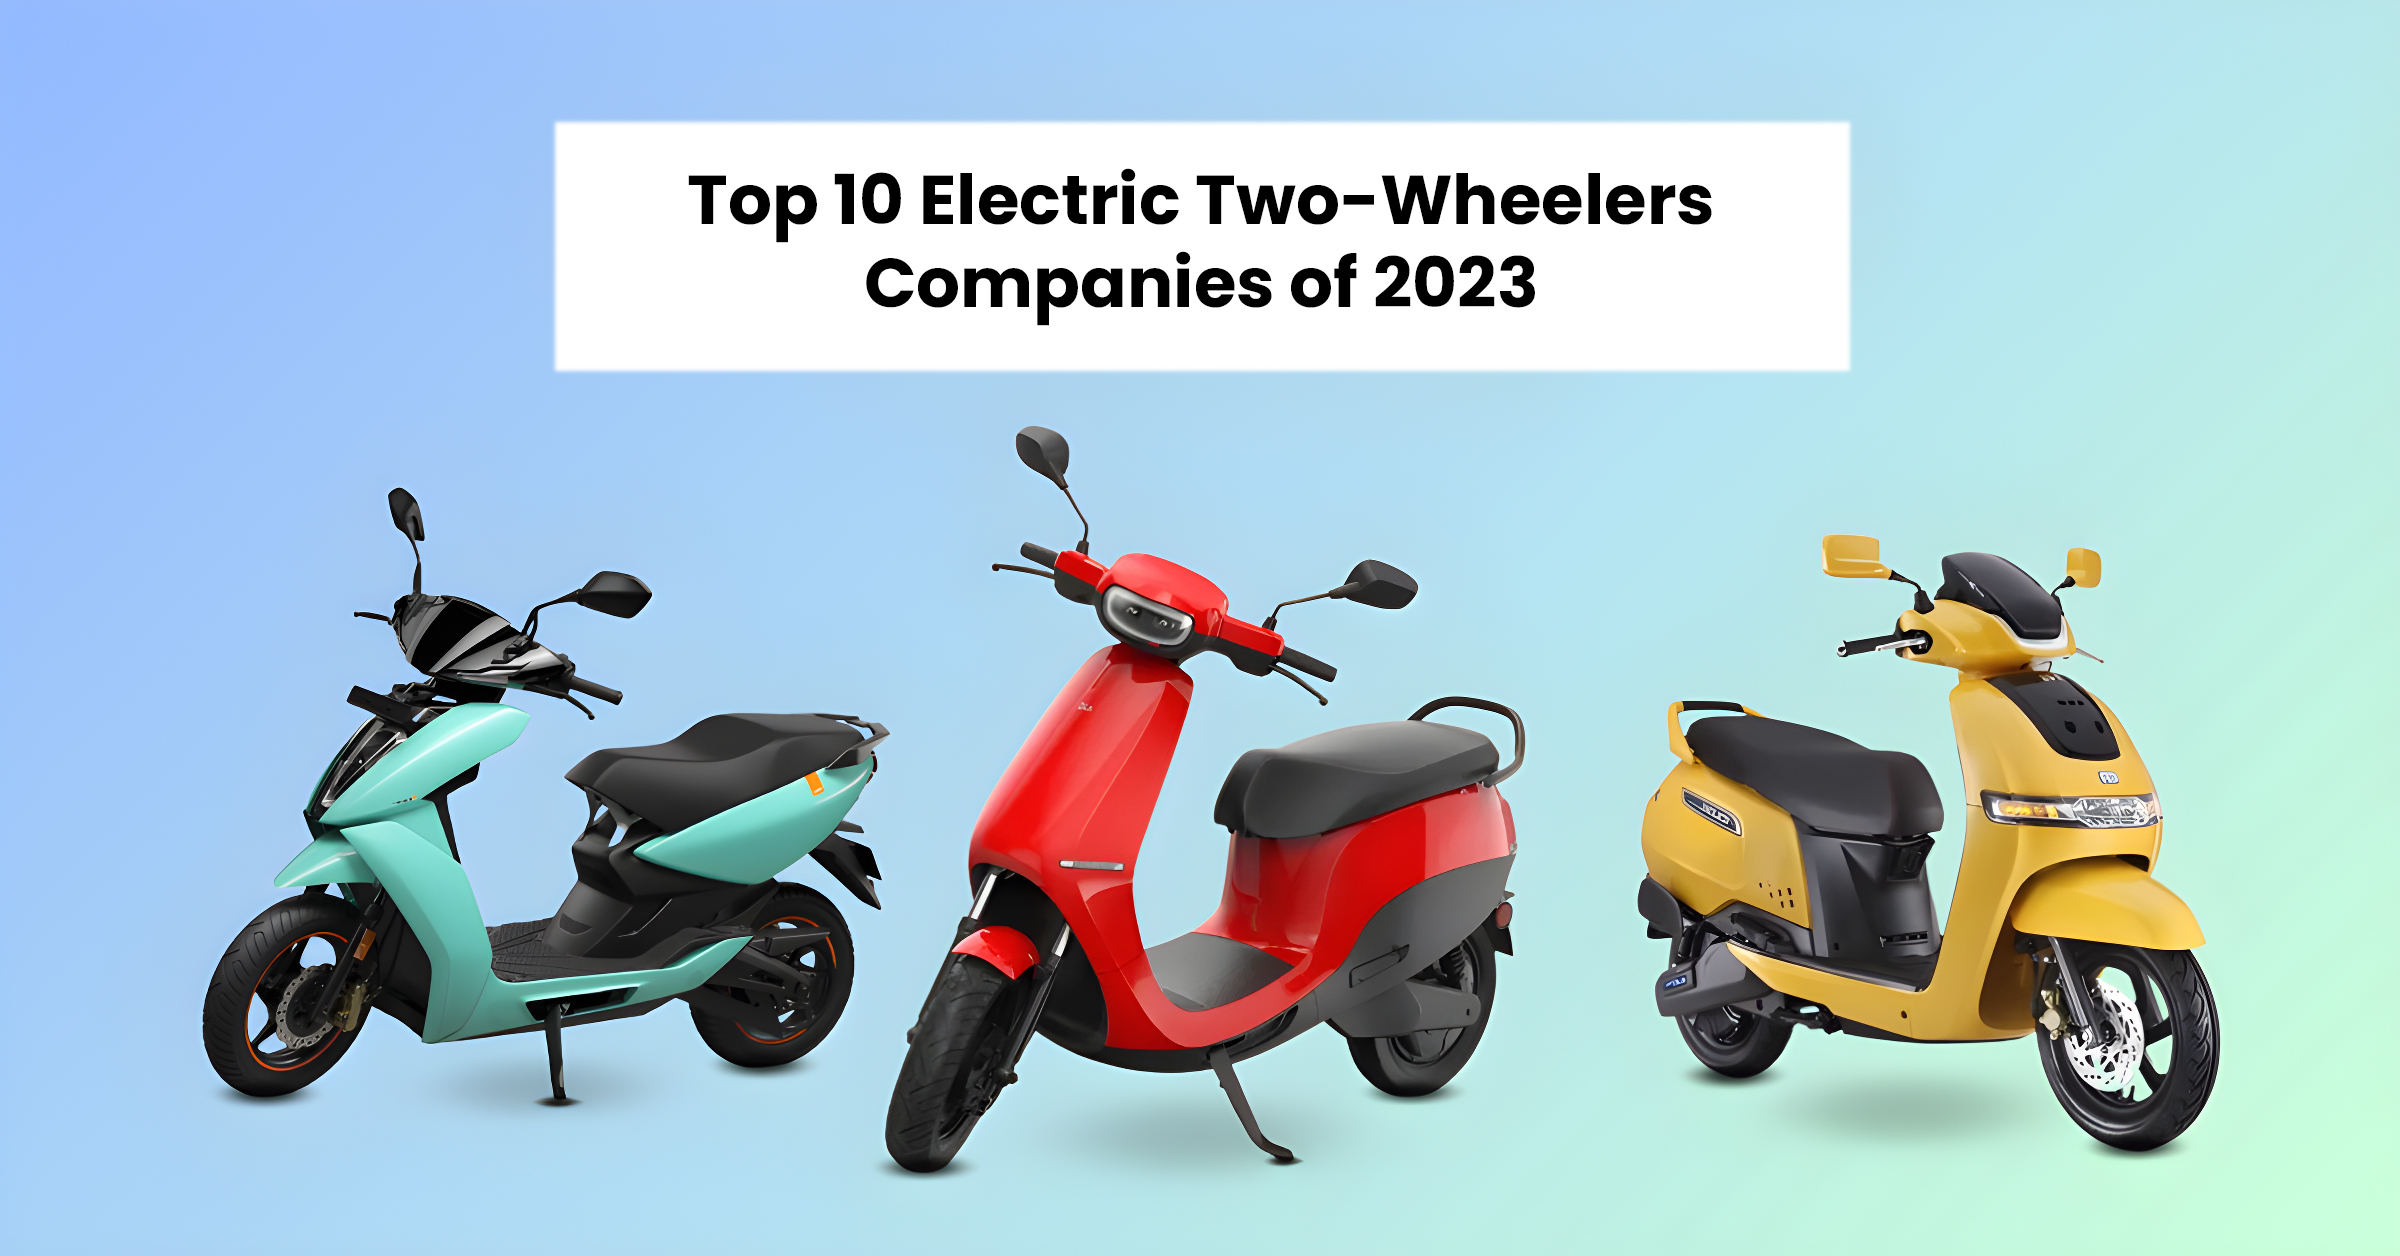 Top 10 Electric Two-Wheelers Companies of 2023